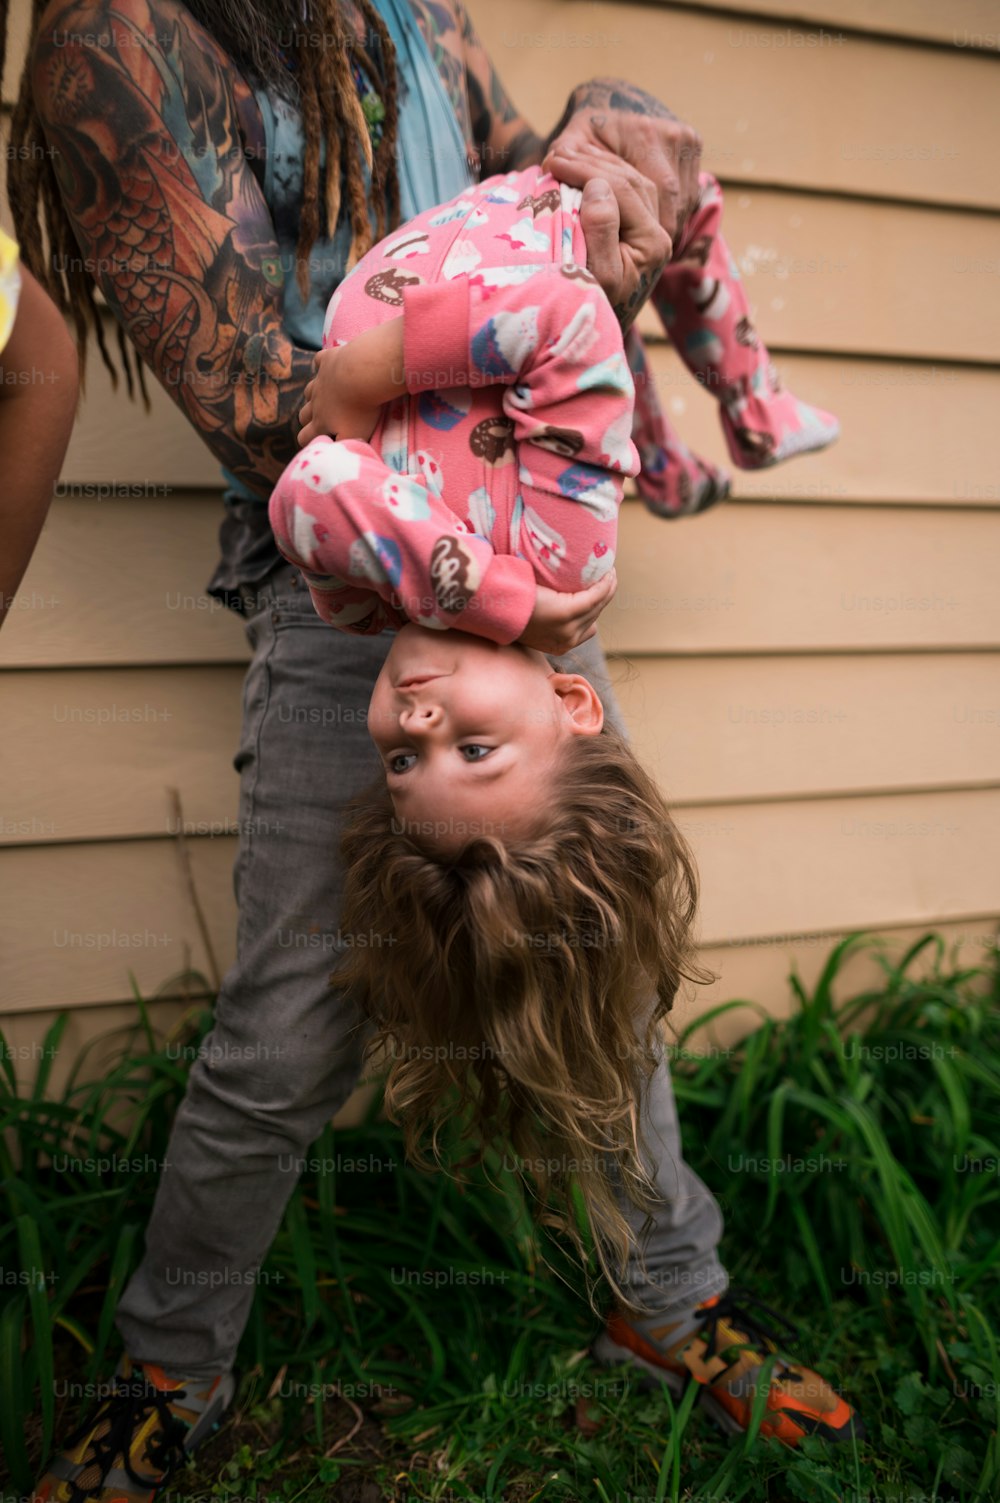 a man holding a child upside down in the grass